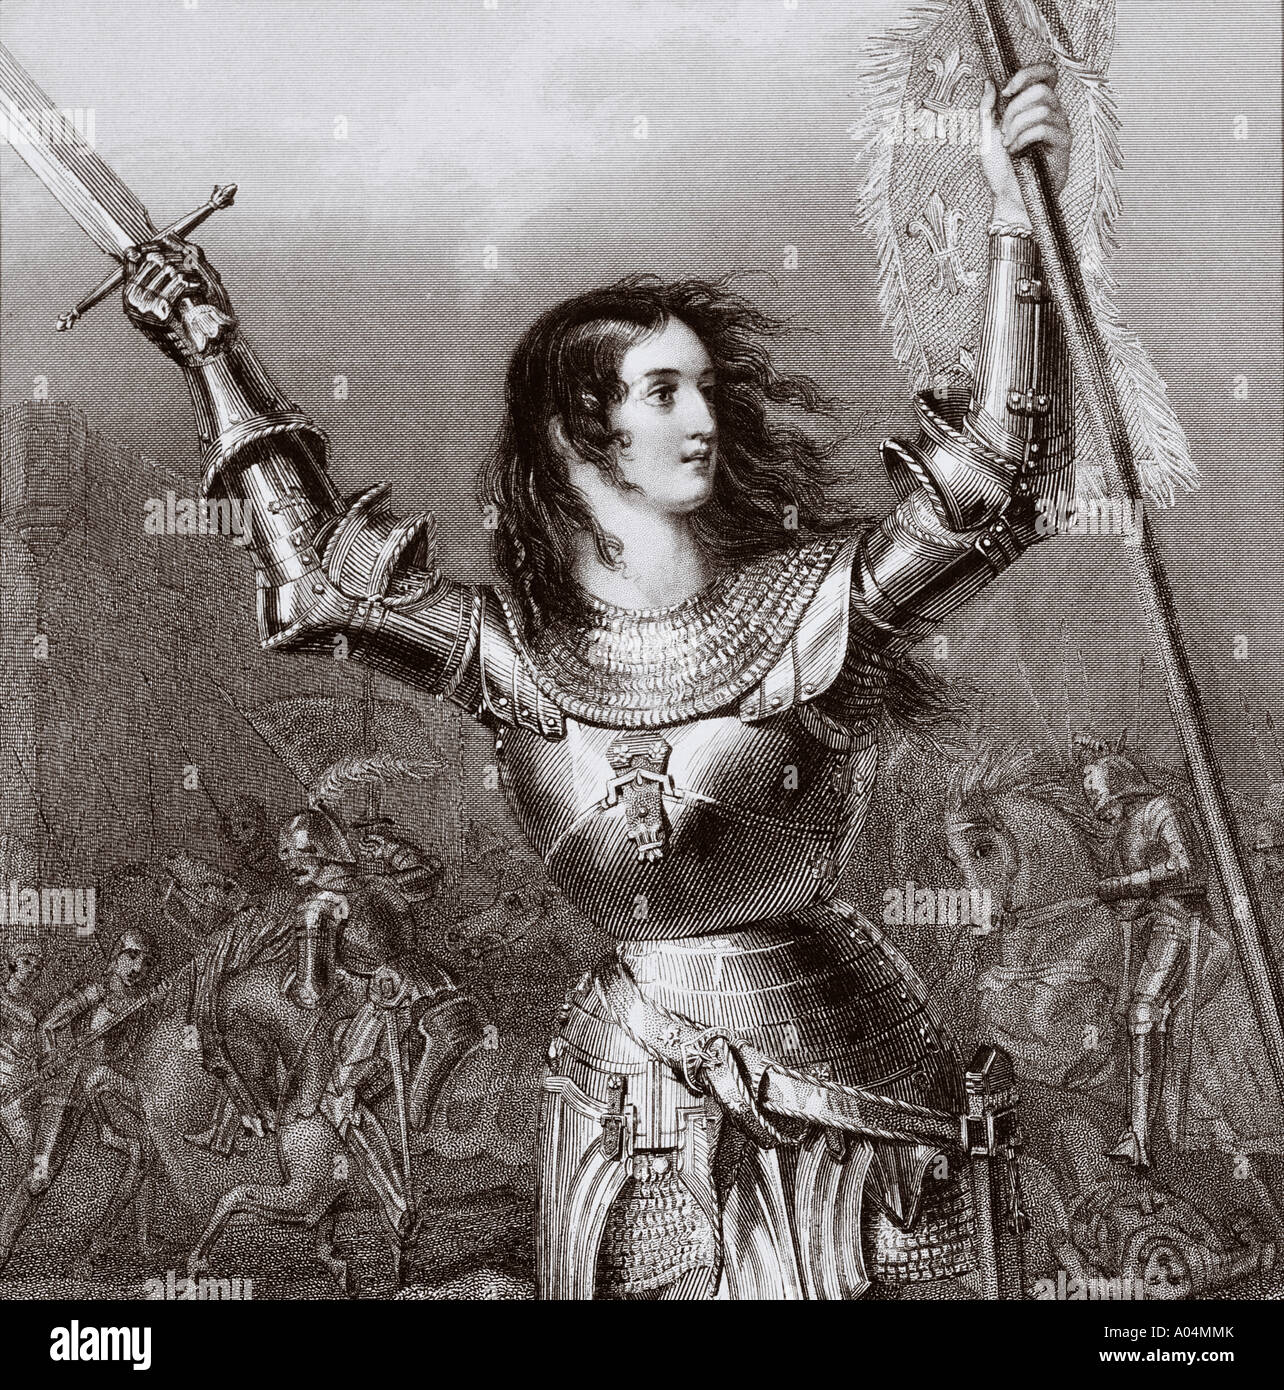 Joan of Arc 1412 - 1431, aka Jeanne d'Arc or Jeanne la Pucelle. French heroine and martyr. Stock Photo